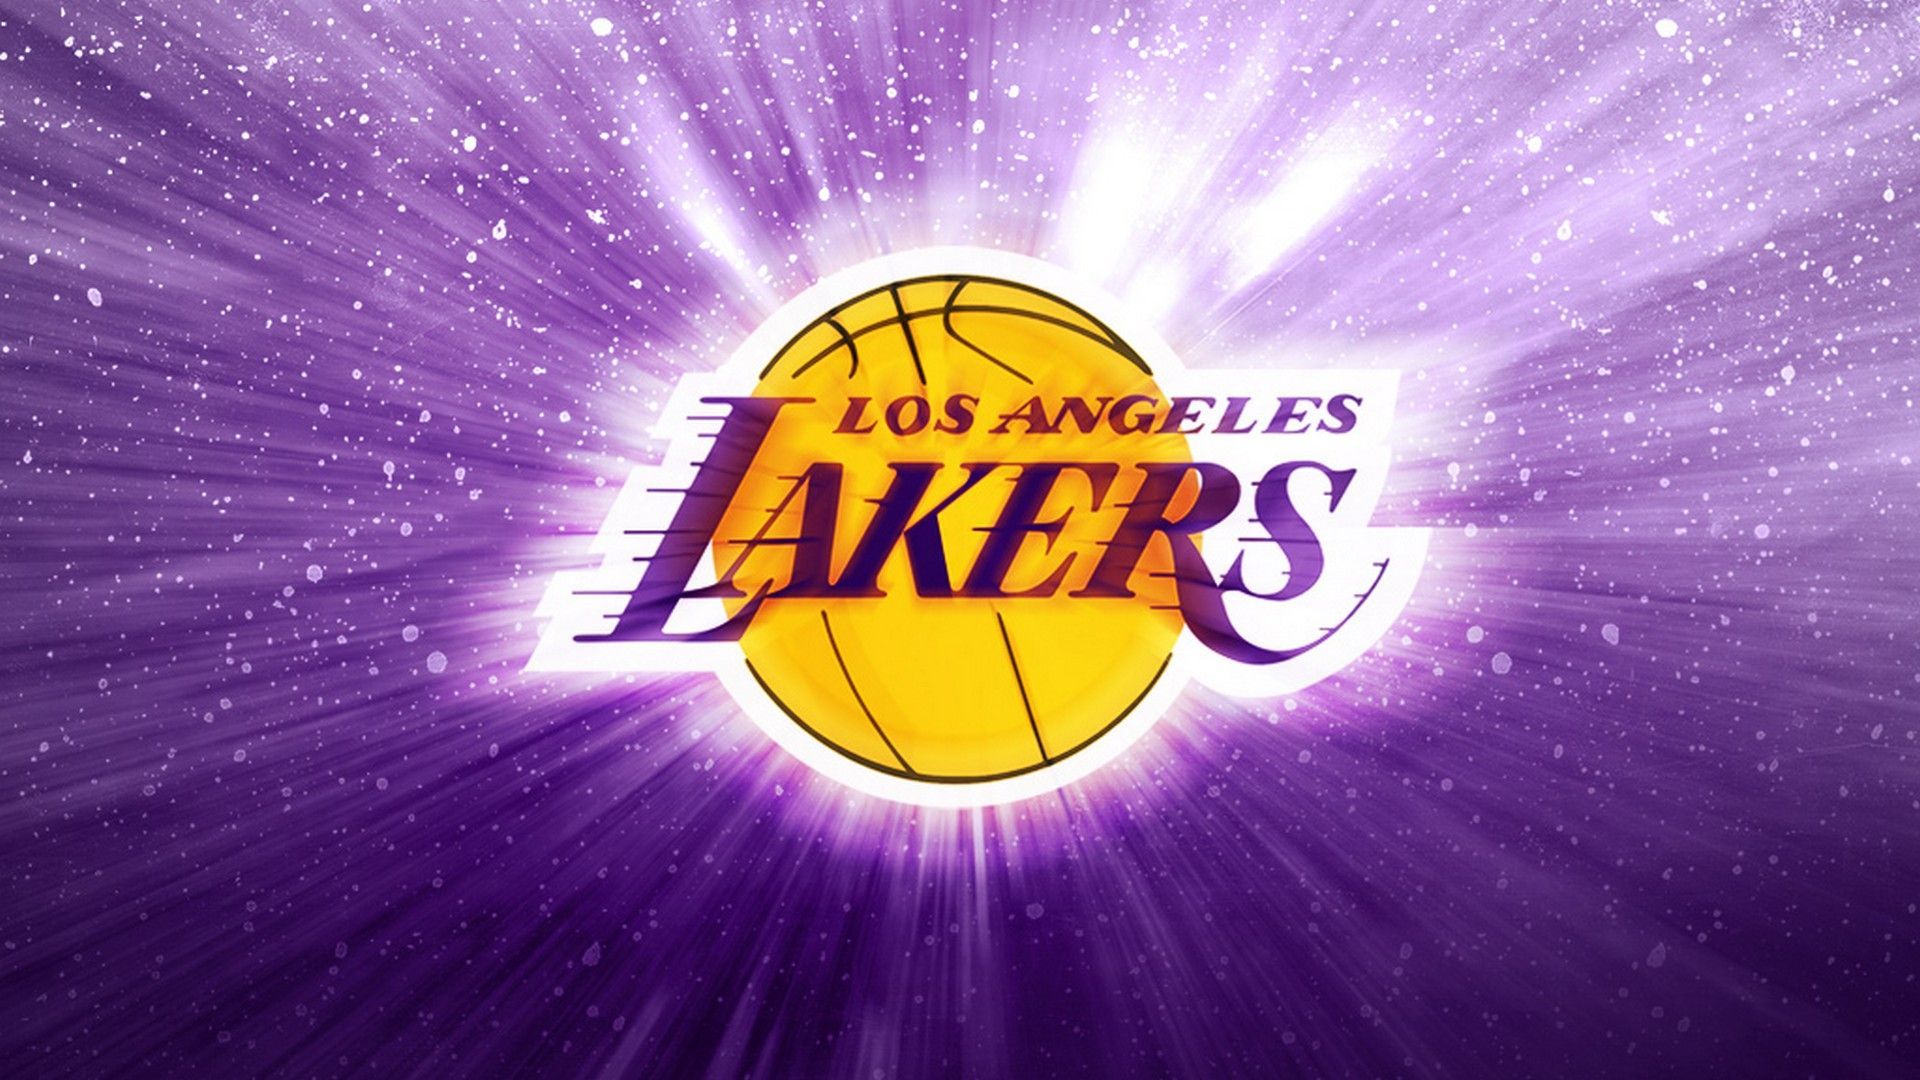 LA Lakers Wallpaper with image dimensions 1920x1080 pixel. You can make this wallpaper for your Deskto. Lakers wallpaper, Basketball wallpaper, Los angeles lakers